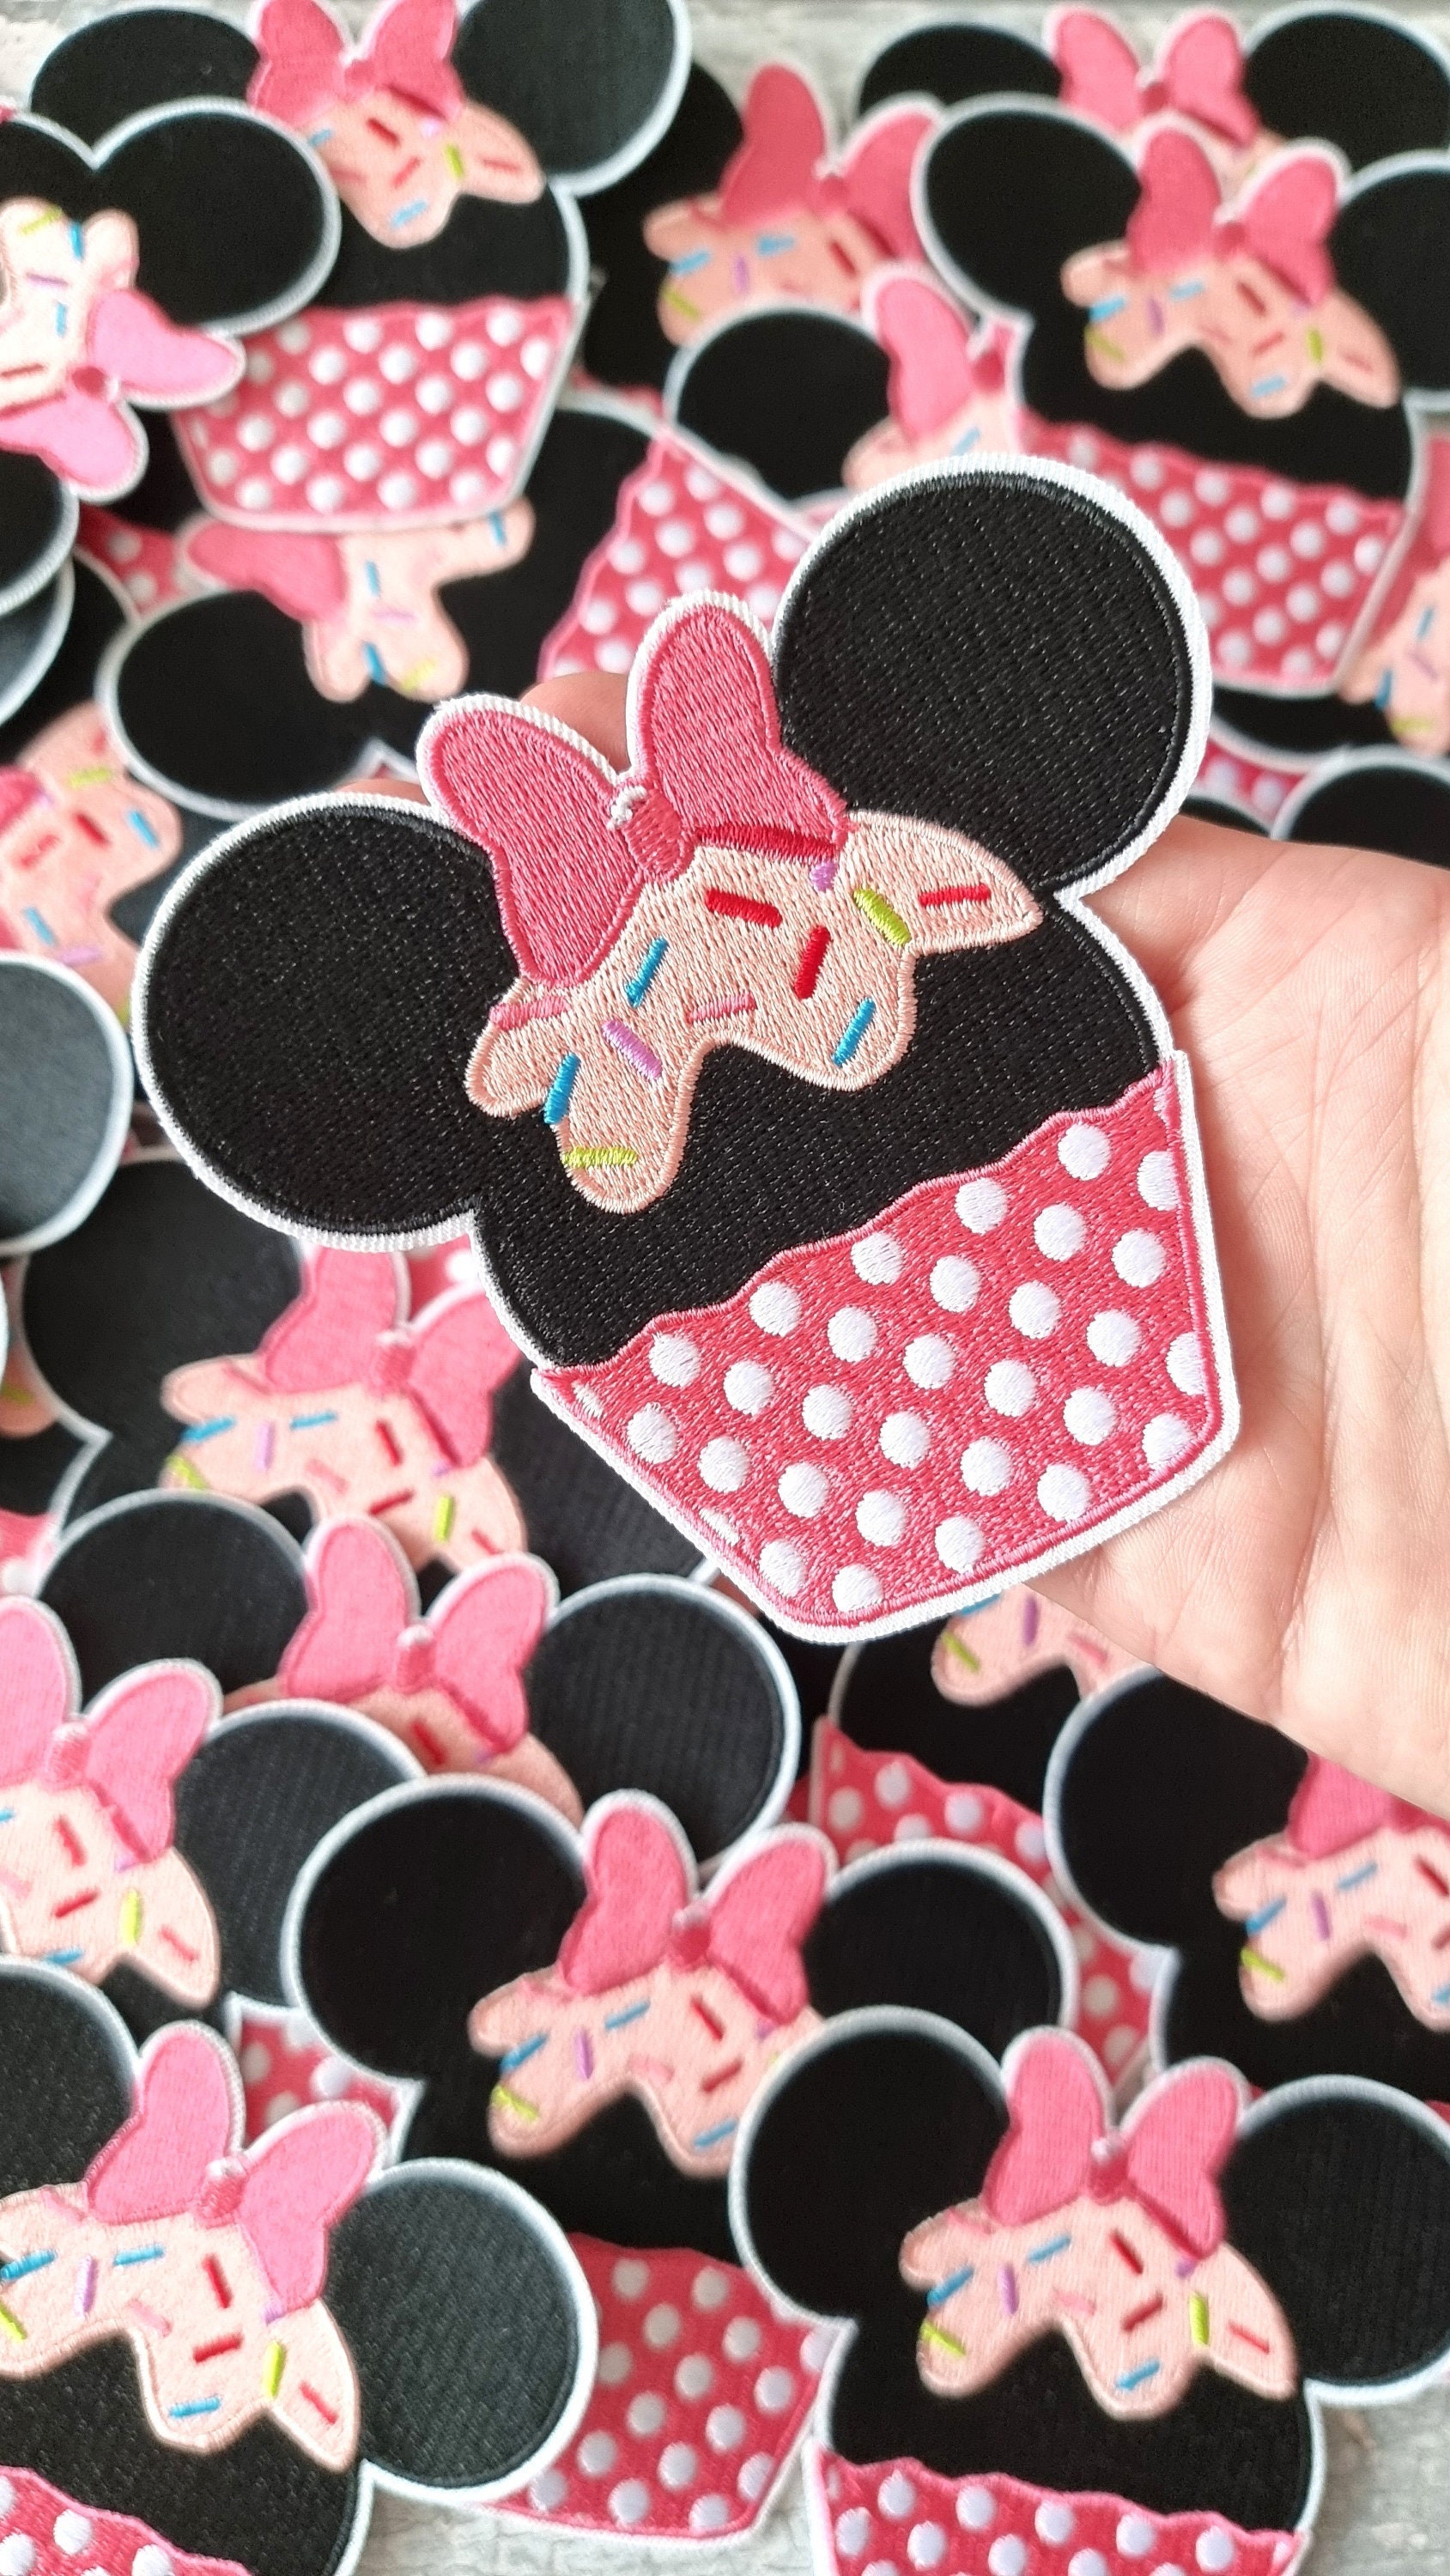 Pin by Allison on DISNEY PATCHES  Disney patches, Minnie, Minnie mouse